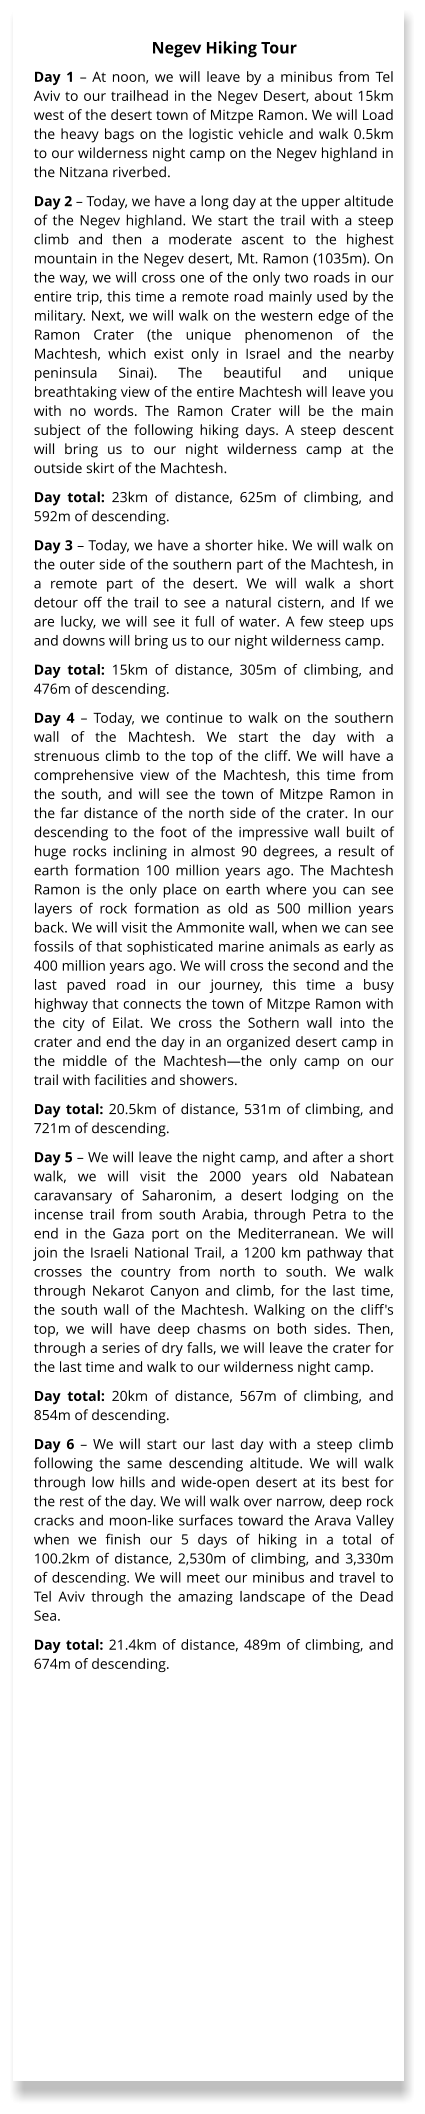 Day 1 – At noon, we will leave by a minibus from Tel Aviv to our trailhead in the Negev Desert, about 15km west of the desert town of Mitzpe Ramon. We will Load the heavy bags on the logistic vehicle and walk 0.5km to our wilderness night camp on the Negev highland in the Nitzana riverbed. Day 2 – Today, we have a long day at the upper altitude of the Negev highland. We start the trail with a steep climb and then a moderate ascent to the highest mountain in the Negev desert, Mt. Ramon (1035m). On the way, we will cross one of the only two roads in our entire trip, this time a remote road mainly used by the military. Next, we will walk on the western edge of the Ramon Crater (the unique phenomenon of the Machtesh, which exist only in Israel and the nearby peninsula Sinai). The beautiful and unique breathtaking view of the entire Machtesh will leave you with no words. The Ramon Crater will be the main subject of the following hiking days. A steep descent will bring us to our night wilderness camp at the outside skirt of the Machtesh.  Day total: 23km of distance, 625m of climbing, and 592m of descending. Day 3 – Today, we have a shorter hike. We will walk on the outer side of the southern part of the Machtesh, in a remote part of the desert. We will walk a short detour off the trail to see a natural cistern, and If we are lucky, we will see it full of water. A few steep ups and downs will bring us to our night wilderness camp. Day total: 15km of distance, 305m of climbing, and 476m of descending. Day 4 – Today, we continue to walk on the southern wall of the Machtesh. We start the day with a strenuous climb to the top of the cliff. We will have a comprehensive view of the Machtesh, this time from the south, and will see the town of Mitzpe Ramon in the far distance of the north side of the crater. In our descending to the foot of the impressive wall built of huge rocks inclining in almost 90 degrees, a result of earth formation 100 million years ago. The Machtesh Ramon is the only place on earth where you can see layers of rock formation as old as 500 million years back. We will visit the Ammonite wall, when we can see fossils of that sophisticated marine animals as early as 400 million years ago. We will cross the second and the last paved road in our journey, this time a busy highway that connects the town of Mitzpe Ramon with the city of Eilat. We cross the Sothern wall into the crater and end the day in an organized desert camp in the middle of the Machtesh—the only camp on our trail with facilities and showers. Day total: 20.5km of distance, 531m of climbing, and 721m of descending. Day 5 – We will leave the night camp, and after a short walk, we will visit the 2000 years old Nabatean caravansary of Saharonim, a desert lodging on the incense trail from south Arabia, through Petra to the end in the Gaza port on the Mediterranean. We will join the Israeli National Trail, a 1200 km pathway that crosses the country from north to south. We walk through Nekarot Canyon and climb, for the last time, the south wall of the Machtesh. Walking on the cliff's top, we will have deep chasms on both sides. Then, through a series of dry falls, we will leave the crater for the last time and walk to our wilderness night camp. Day total: 20km of distance, 567m of climbing, and 854m of descending. Day 6 – We will start our last day with a steep climb following the same descending altitude. We will walk through low hills and wide-open desert at its best for the rest of the day. We will walk over narrow, deep rock cracks and moon-like surfaces toward the Arava Valley when we finish our 5 days of hiking in a total of 100.2km of distance, 2,530m of climbing, and 3,330m of descending. We will meet our minibus and travel to Tel Aviv through the amazing landscape of the Dead Sea. Day total: 21.4km of distance, 489m of climbing, and 674m of descending.   Negev Hiking Tour